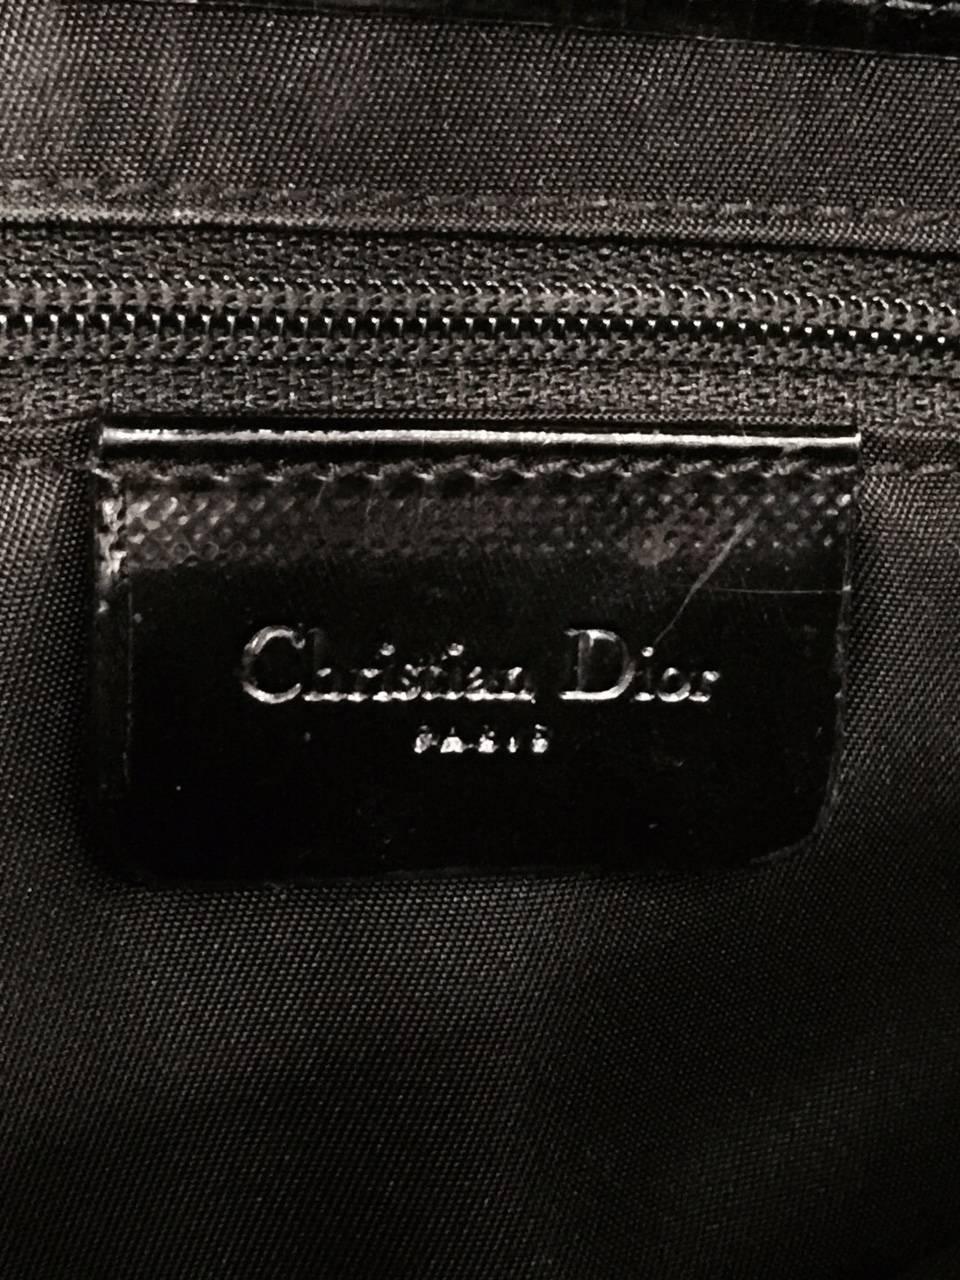 Christian Dior Black Patent and Nylon Saddle Bag  In Excellent Condition For Sale In Palm Beach, FL